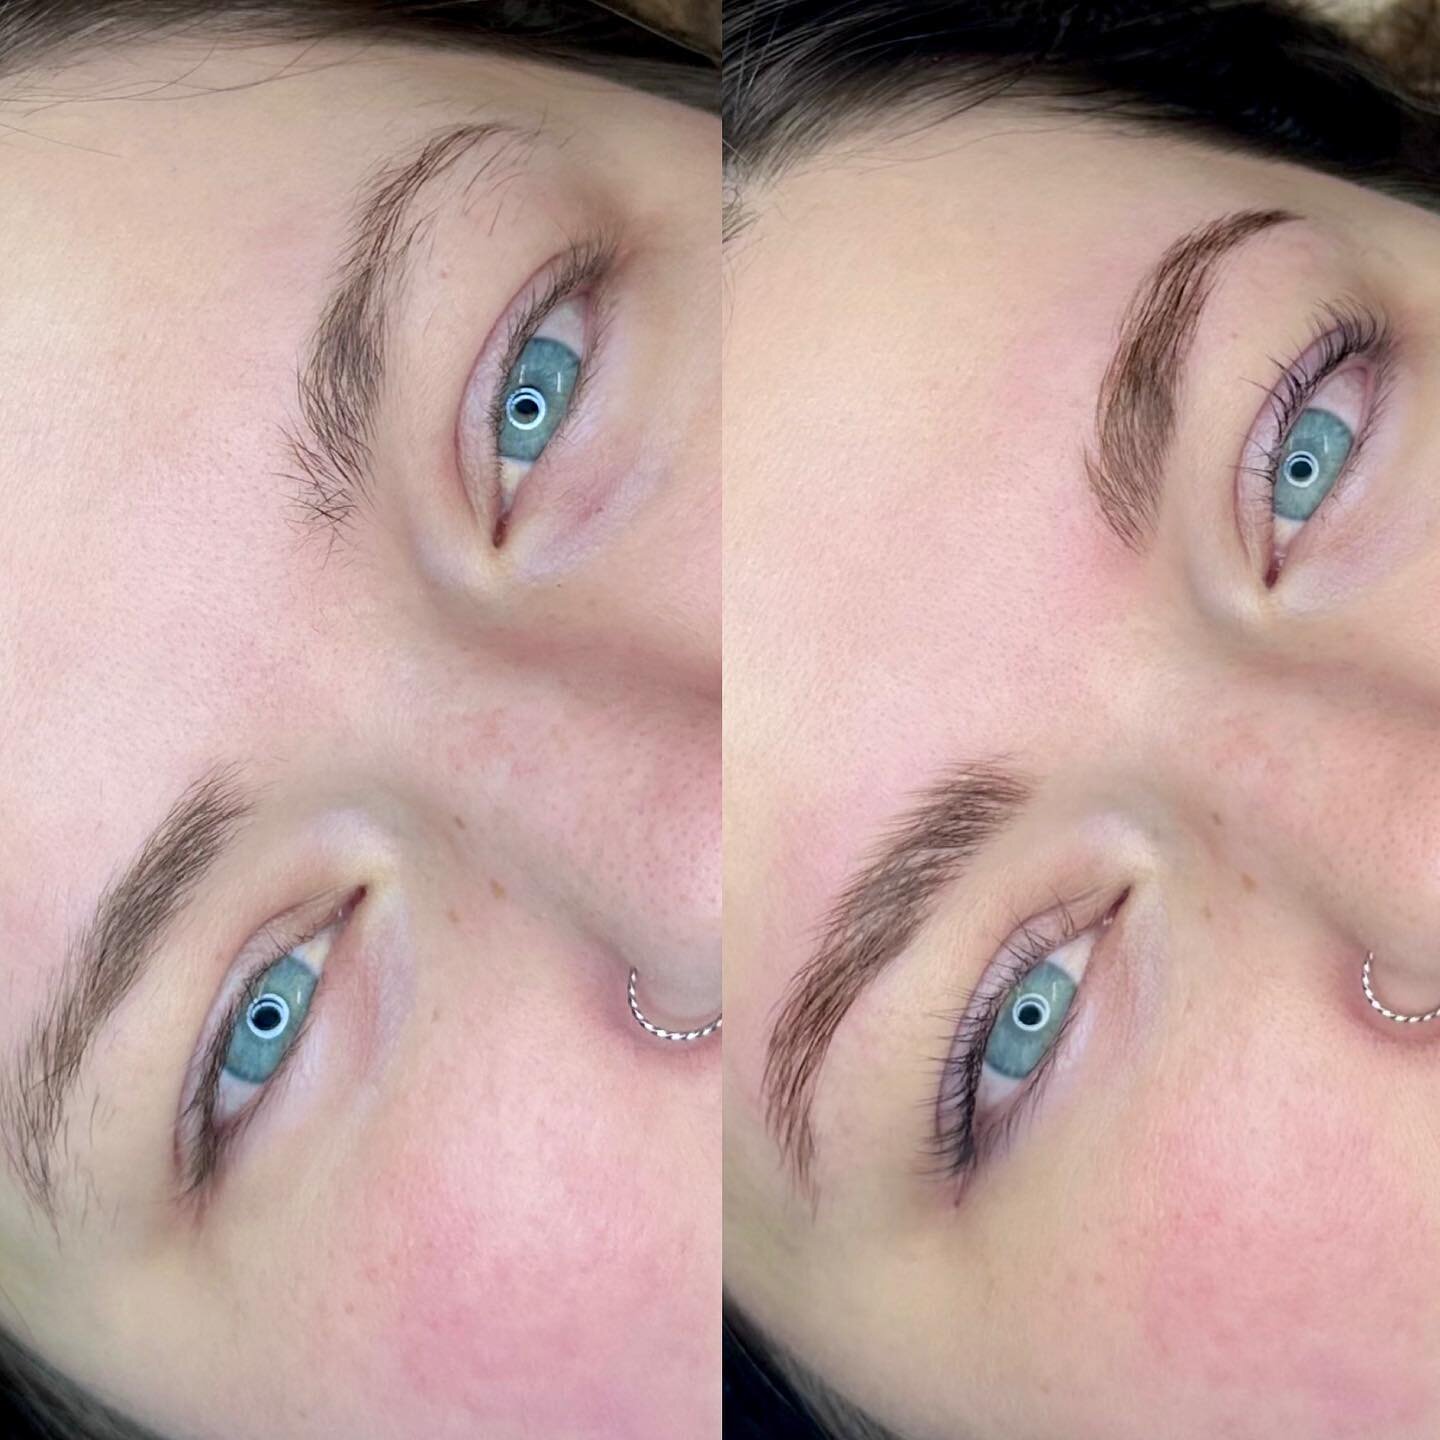 The brow lami in this lash and brow package really popped off 🍾

#lashliftandtint #browlamination #salemorbrowlamination #salemorbrows #salemorlashes #esthetician #browbeforeandafter